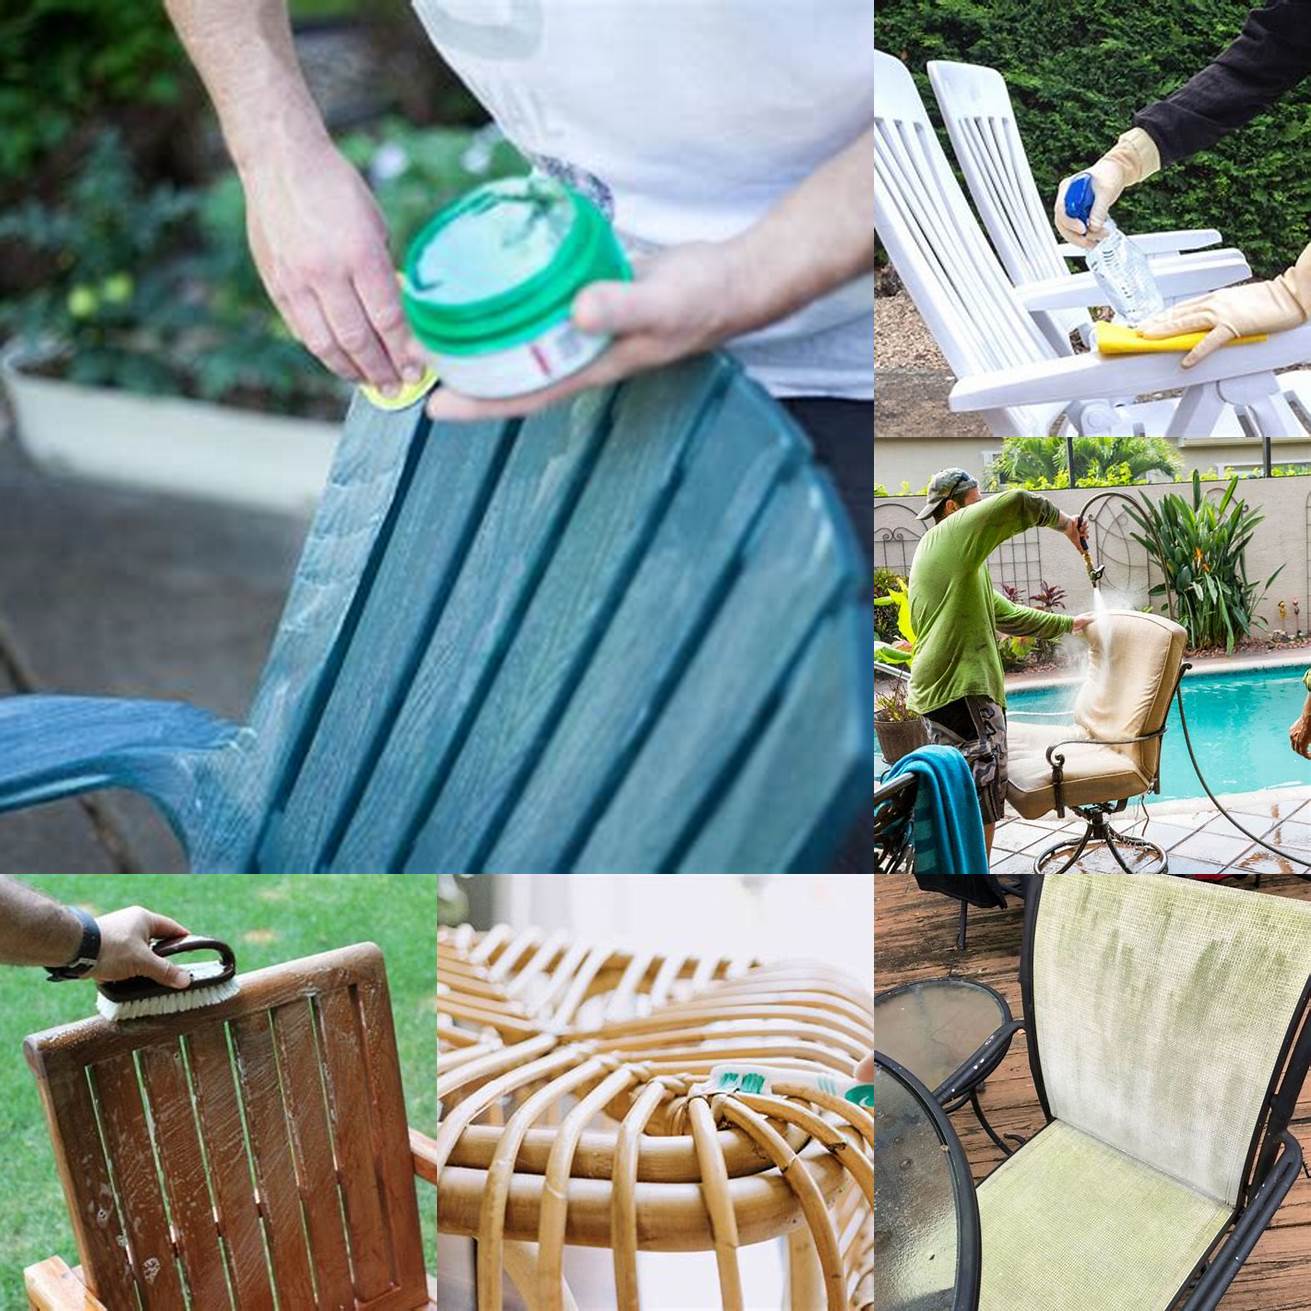 4 Cleaning outdoor furniture